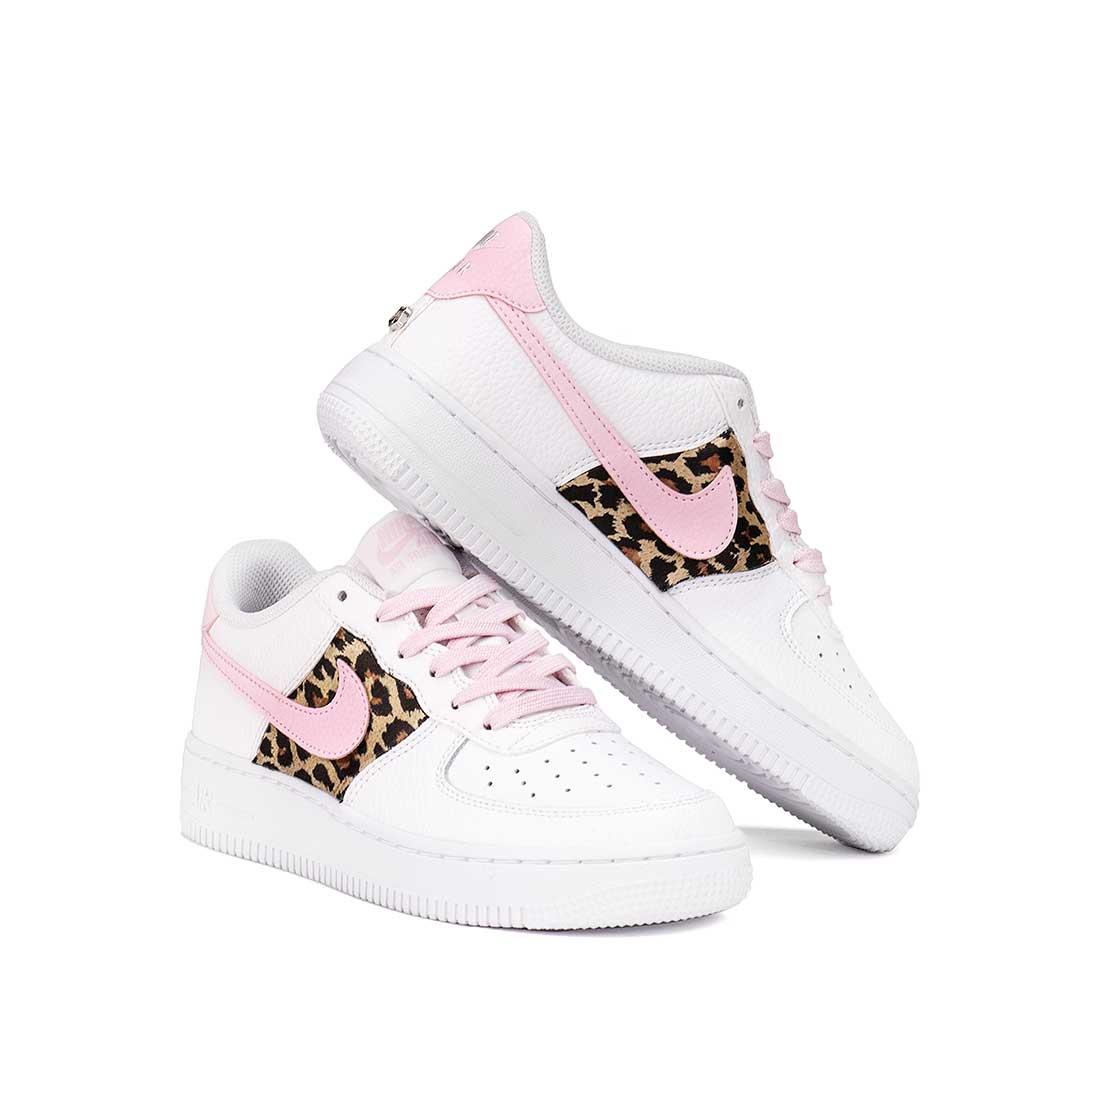 nike air force 1 animalier leopardate rosa